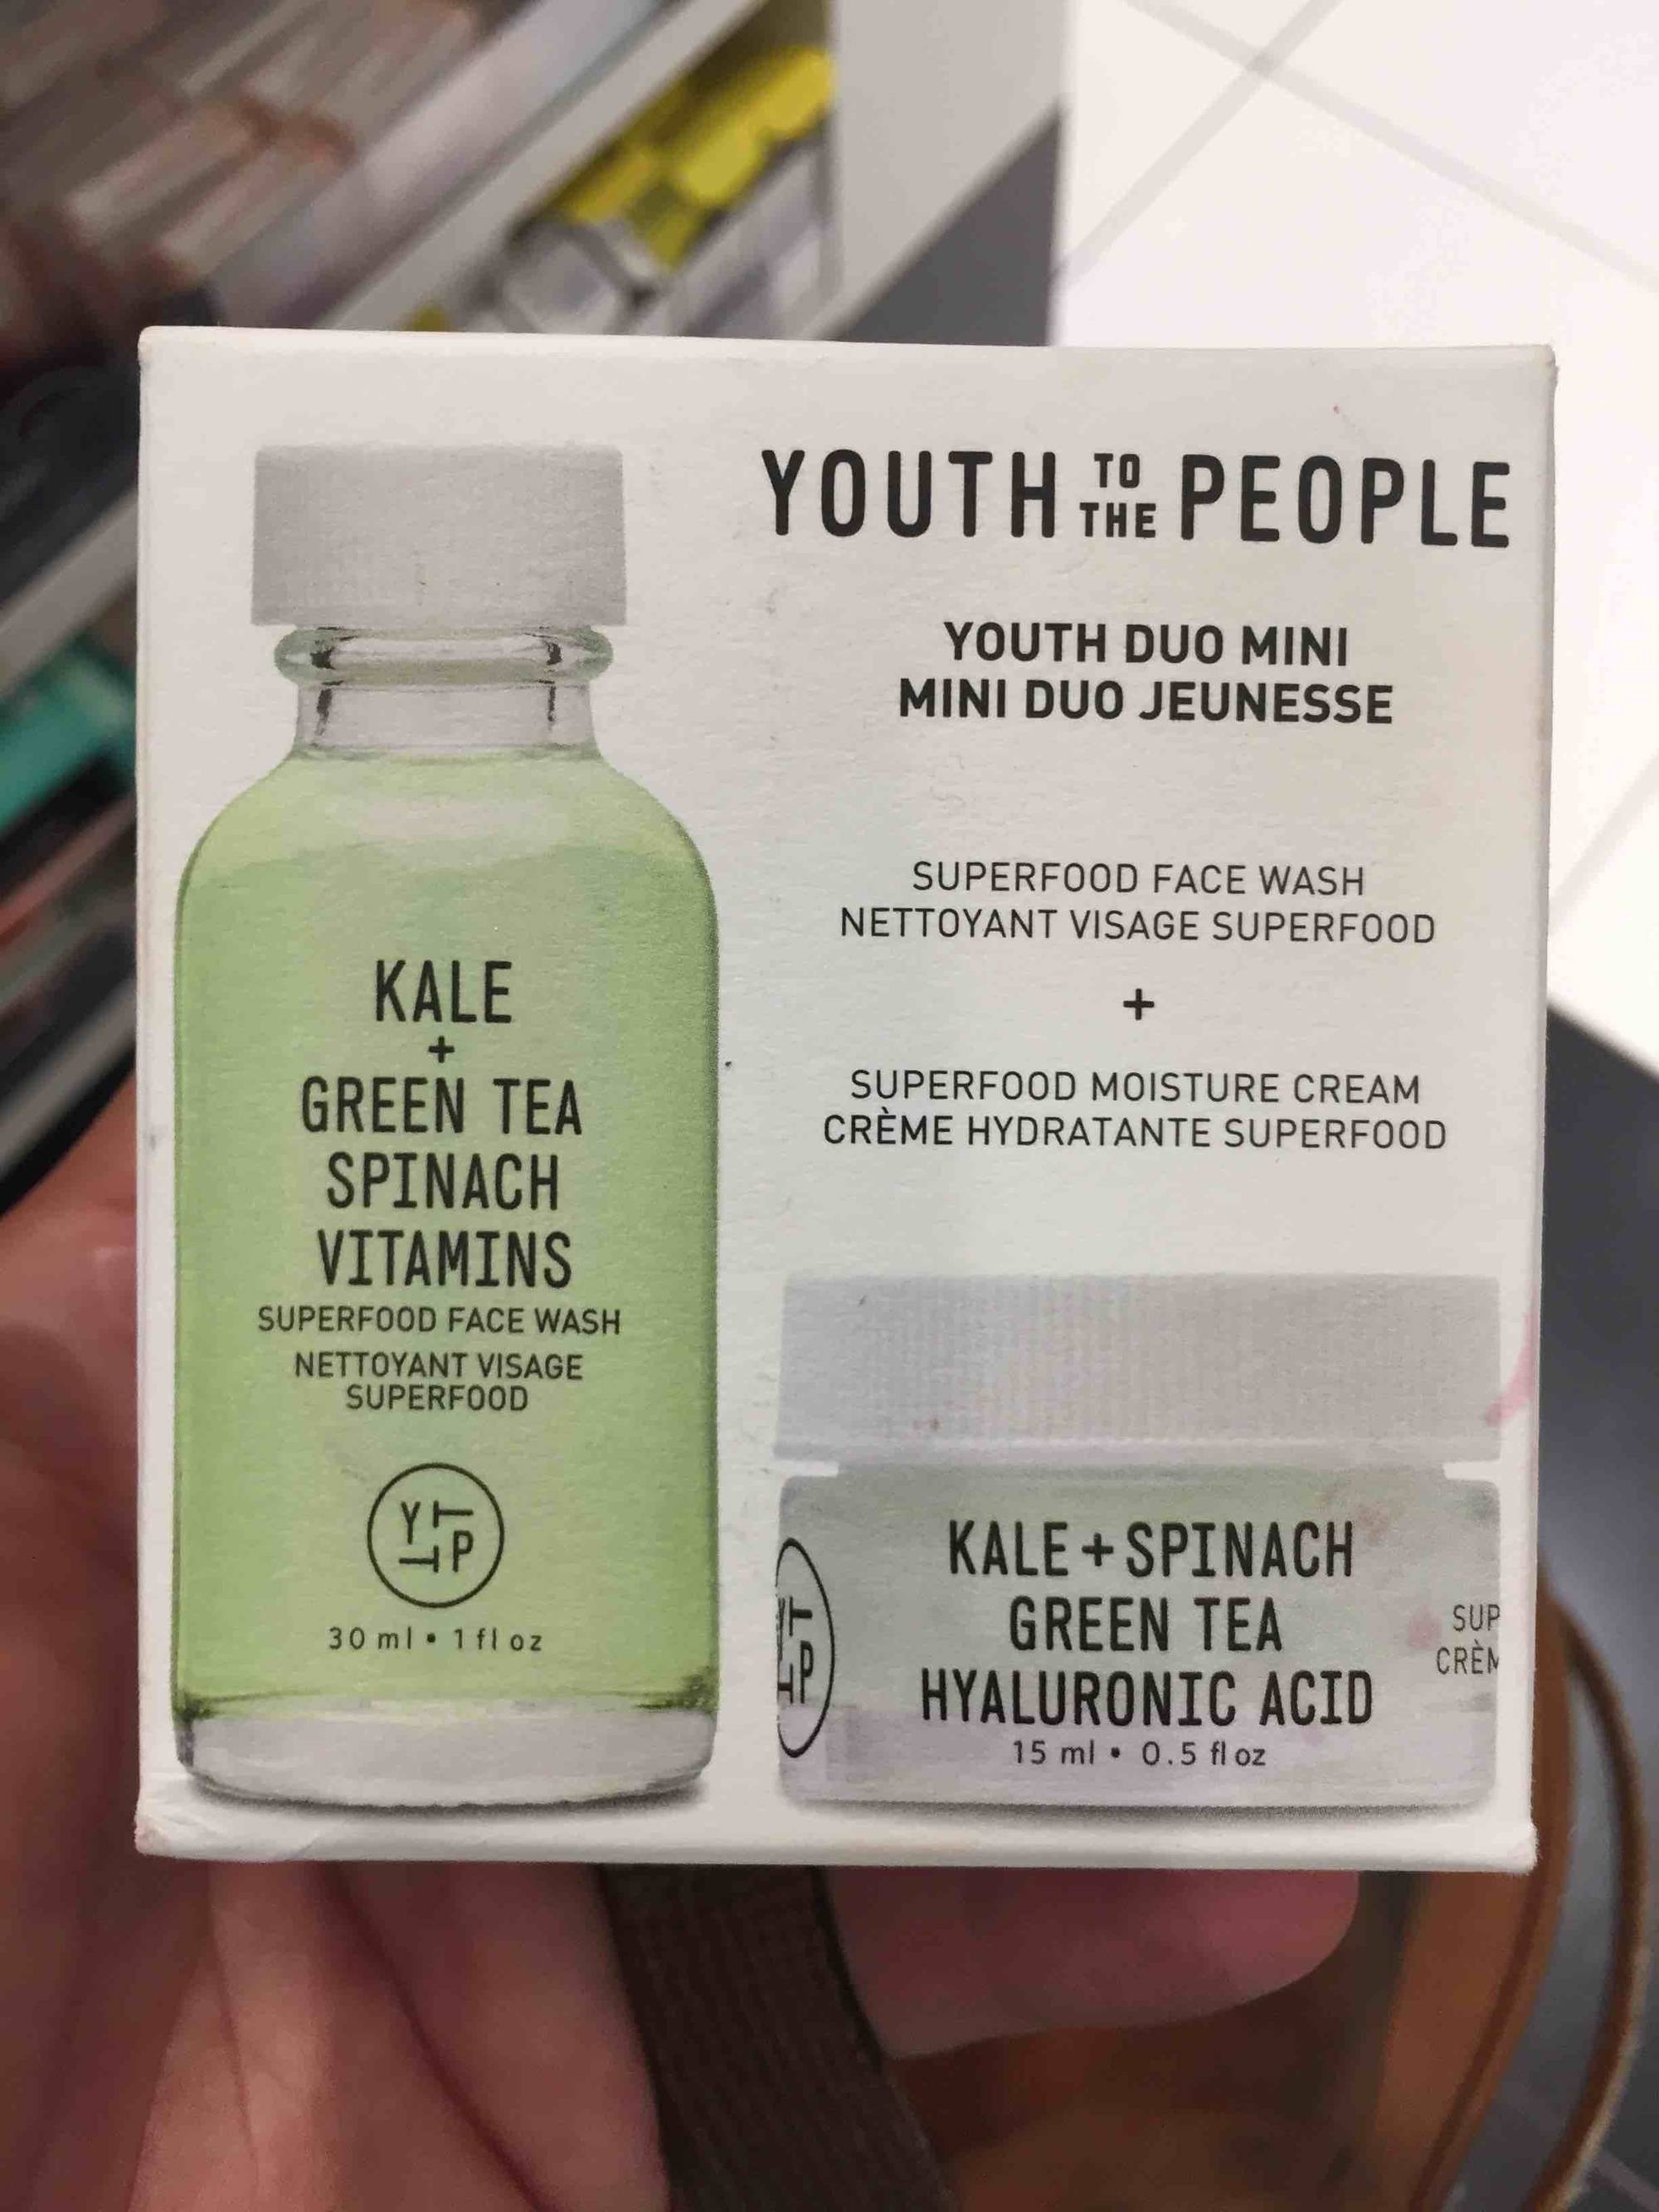 YOUTH TO THE PEOPLE - Nettoyant visage superfood 